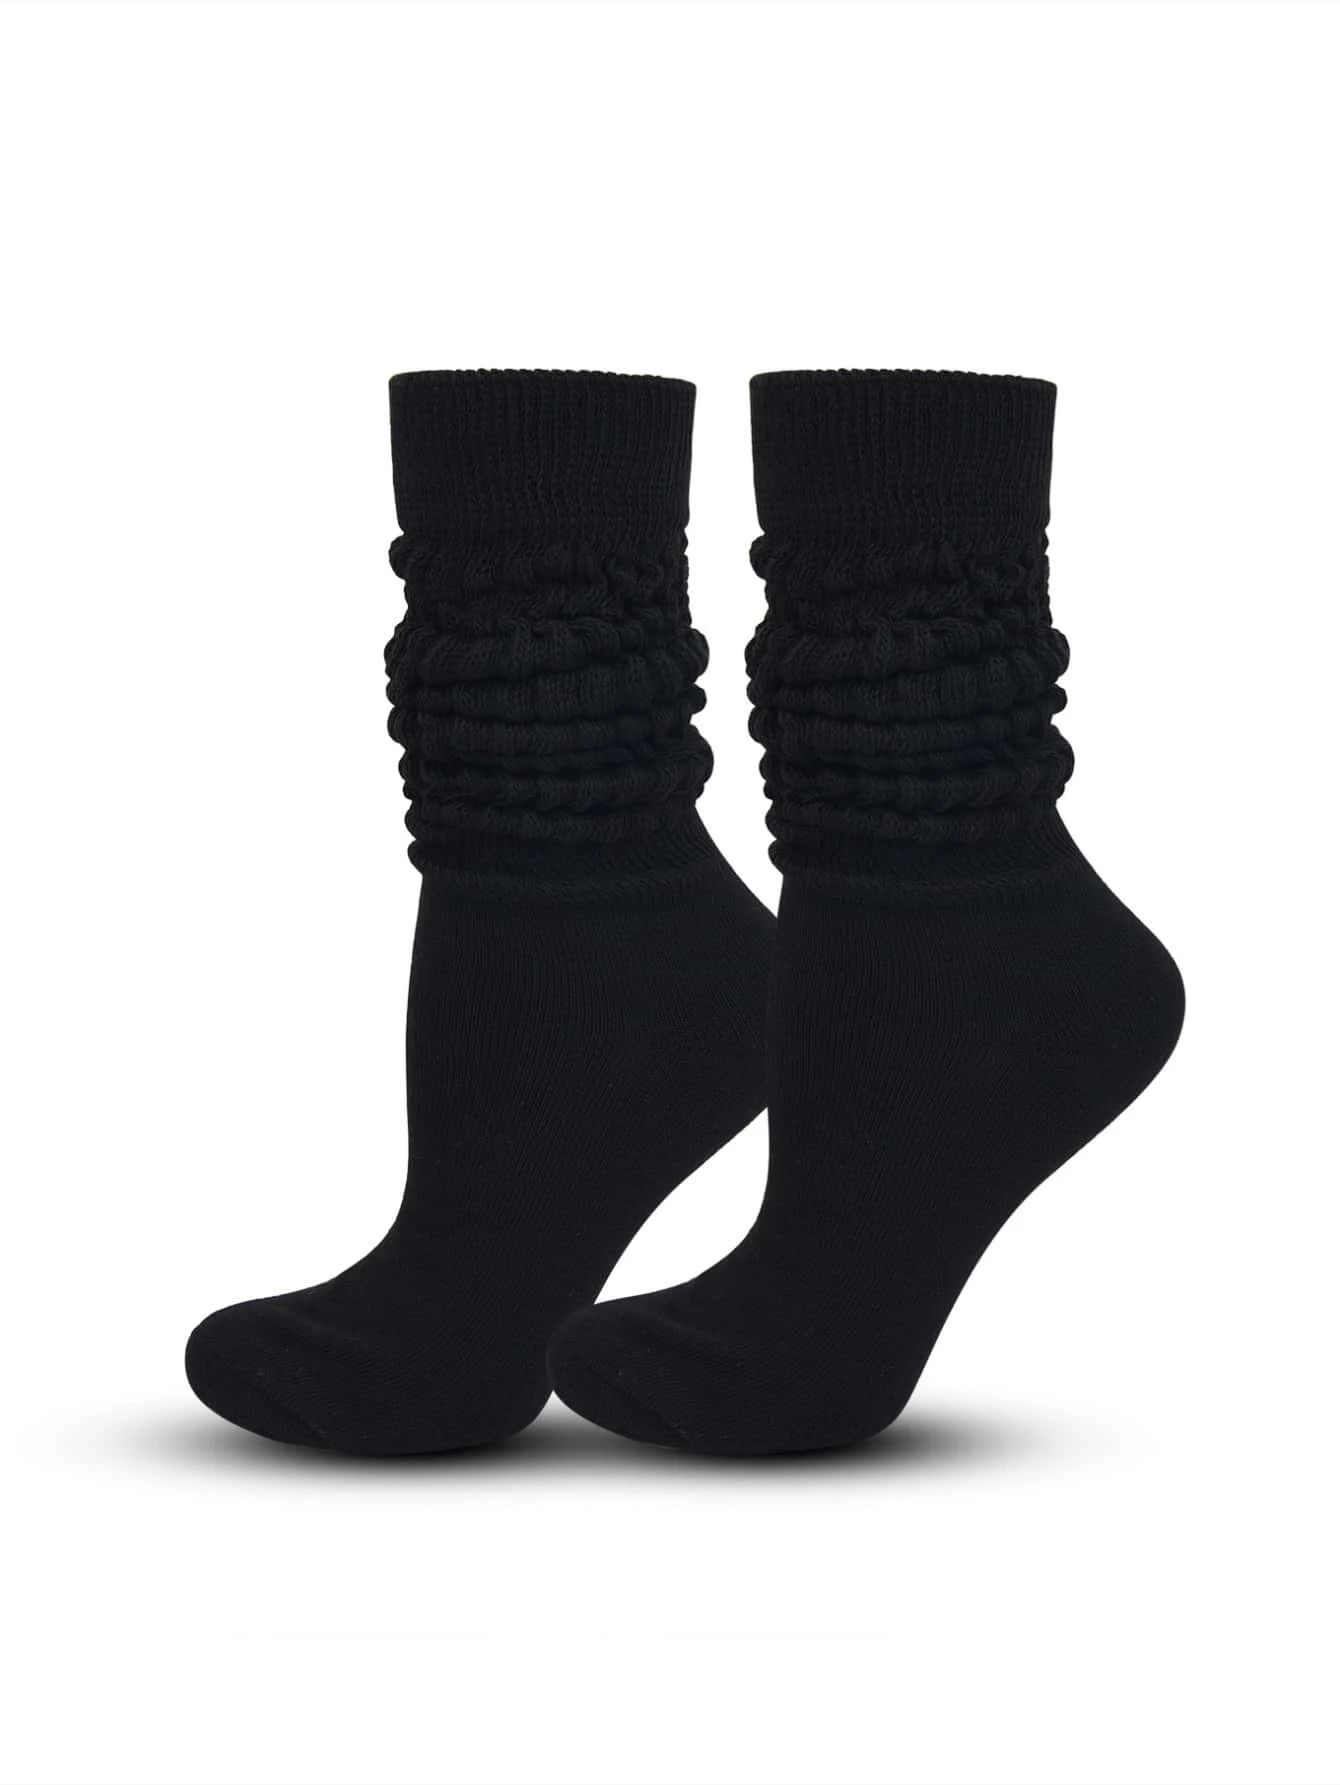 1pair Solid Over The Calf Slouch Socks | SHEIN